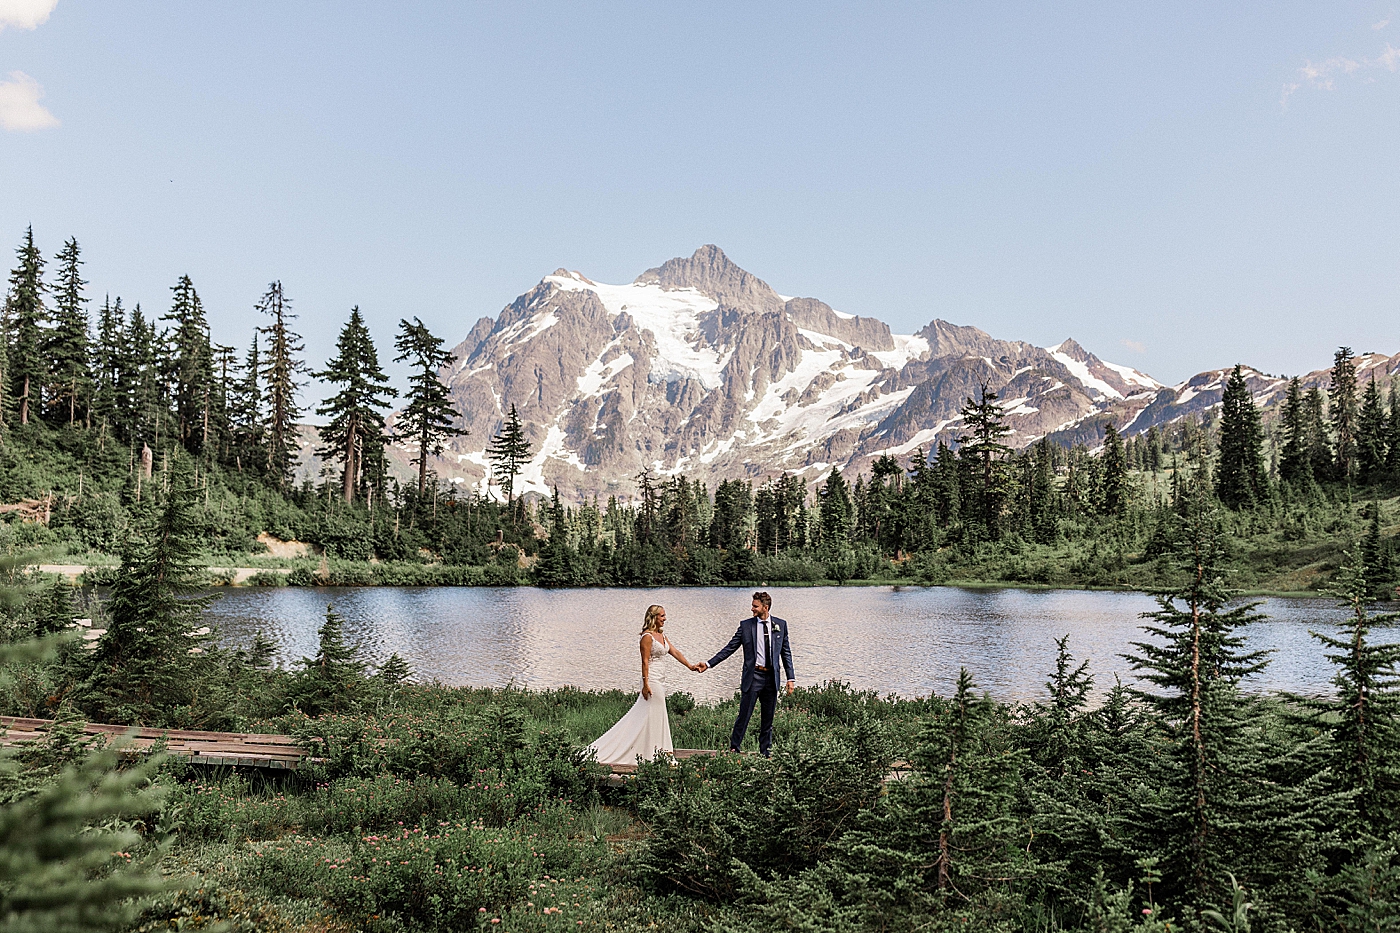 Bride and groom portraits at Mt Baker. Photo by Megan Montalvo Photography.